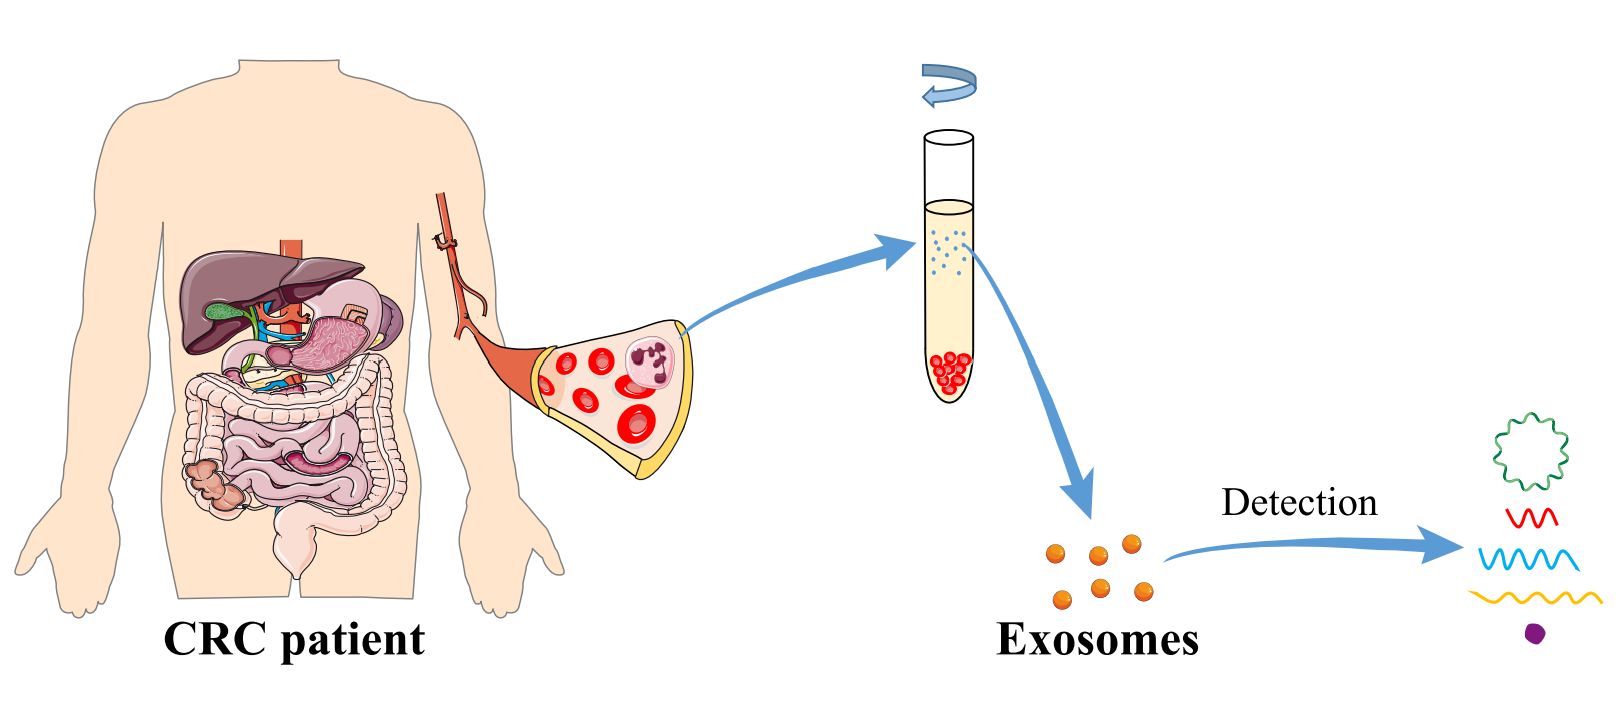 Figure 2. Exosomes as diagnostic biomarkers in CRC.